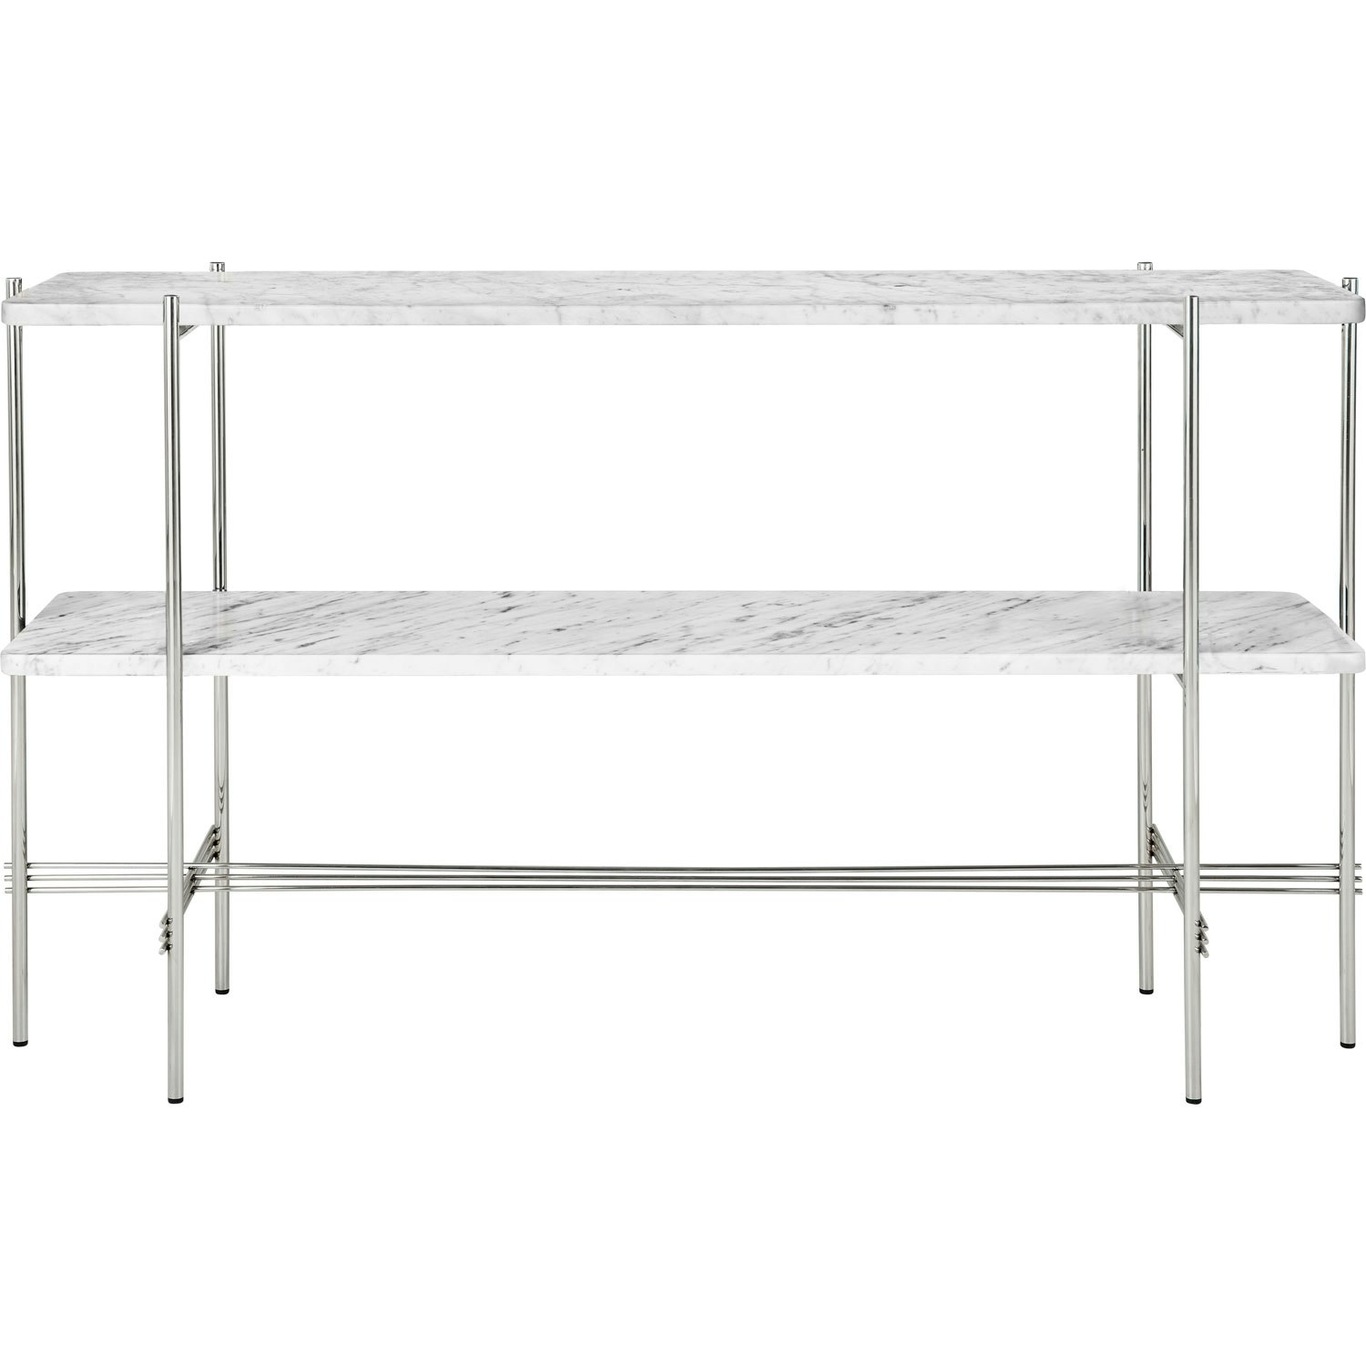 TS Console Side Table 120x30x72 cm, Polished Steel / White Carrara marble